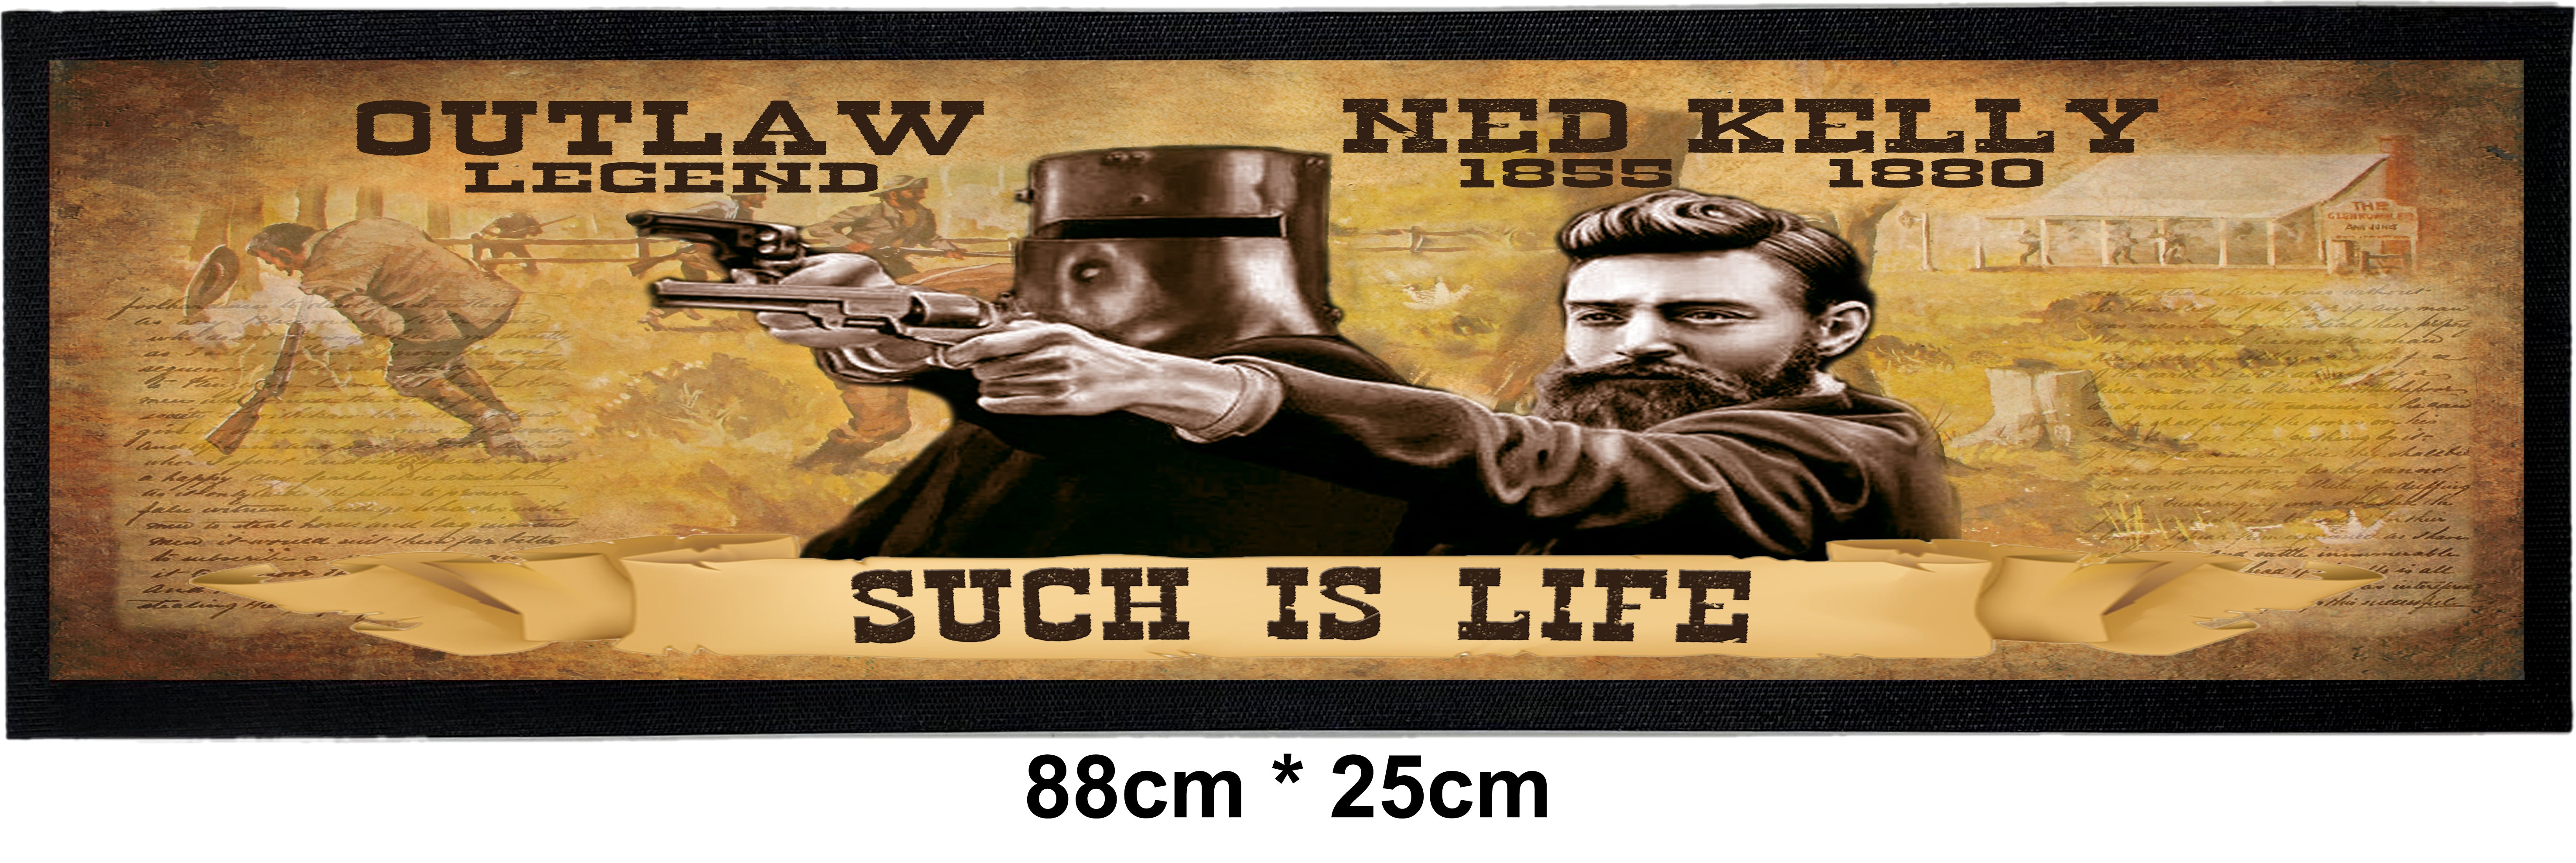 BAR MAT NED KELLY SUCH IS LIFE